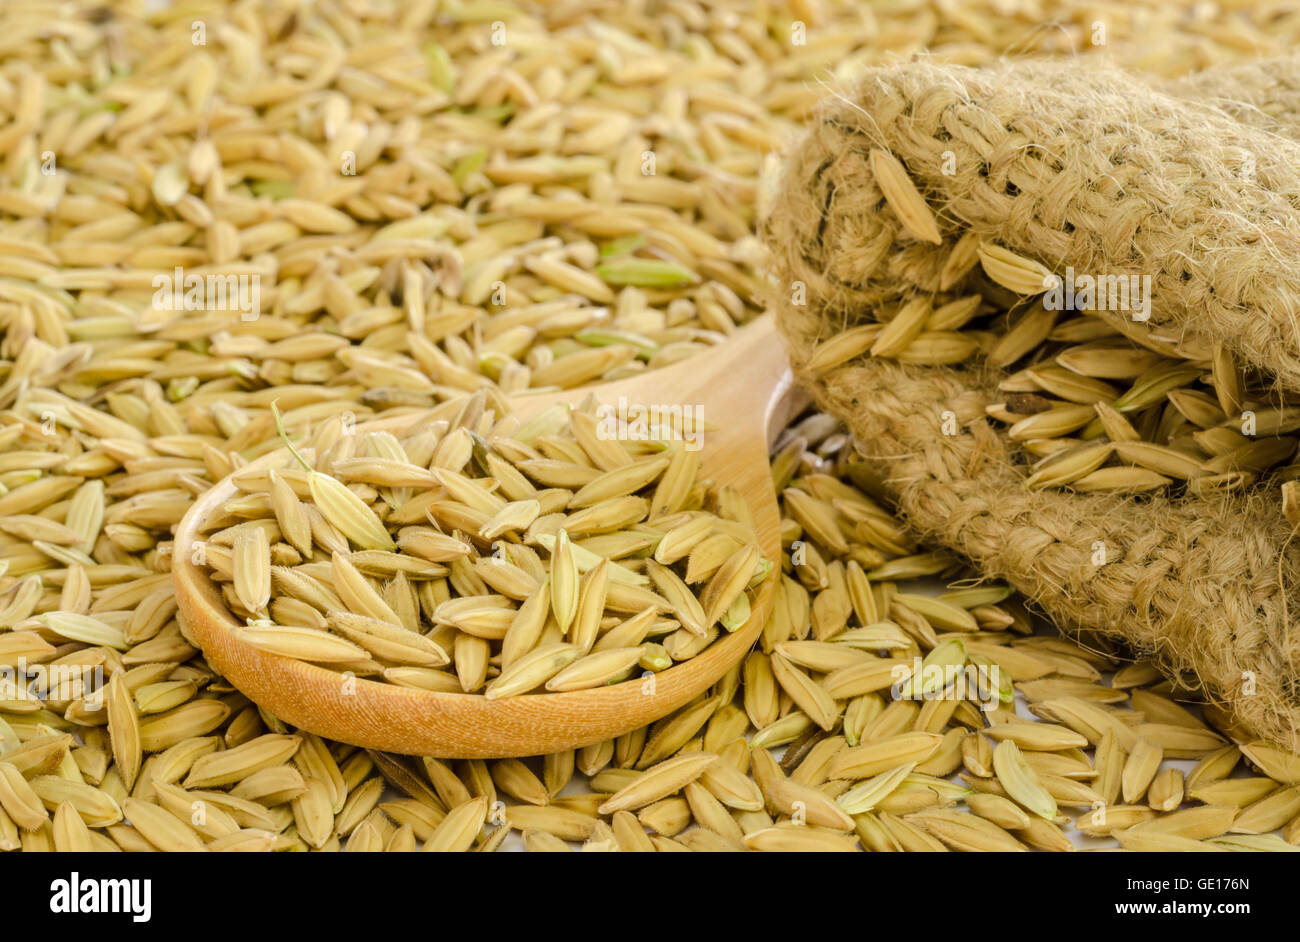 paddy rice seed in a  Burlap sack. Stock Photo